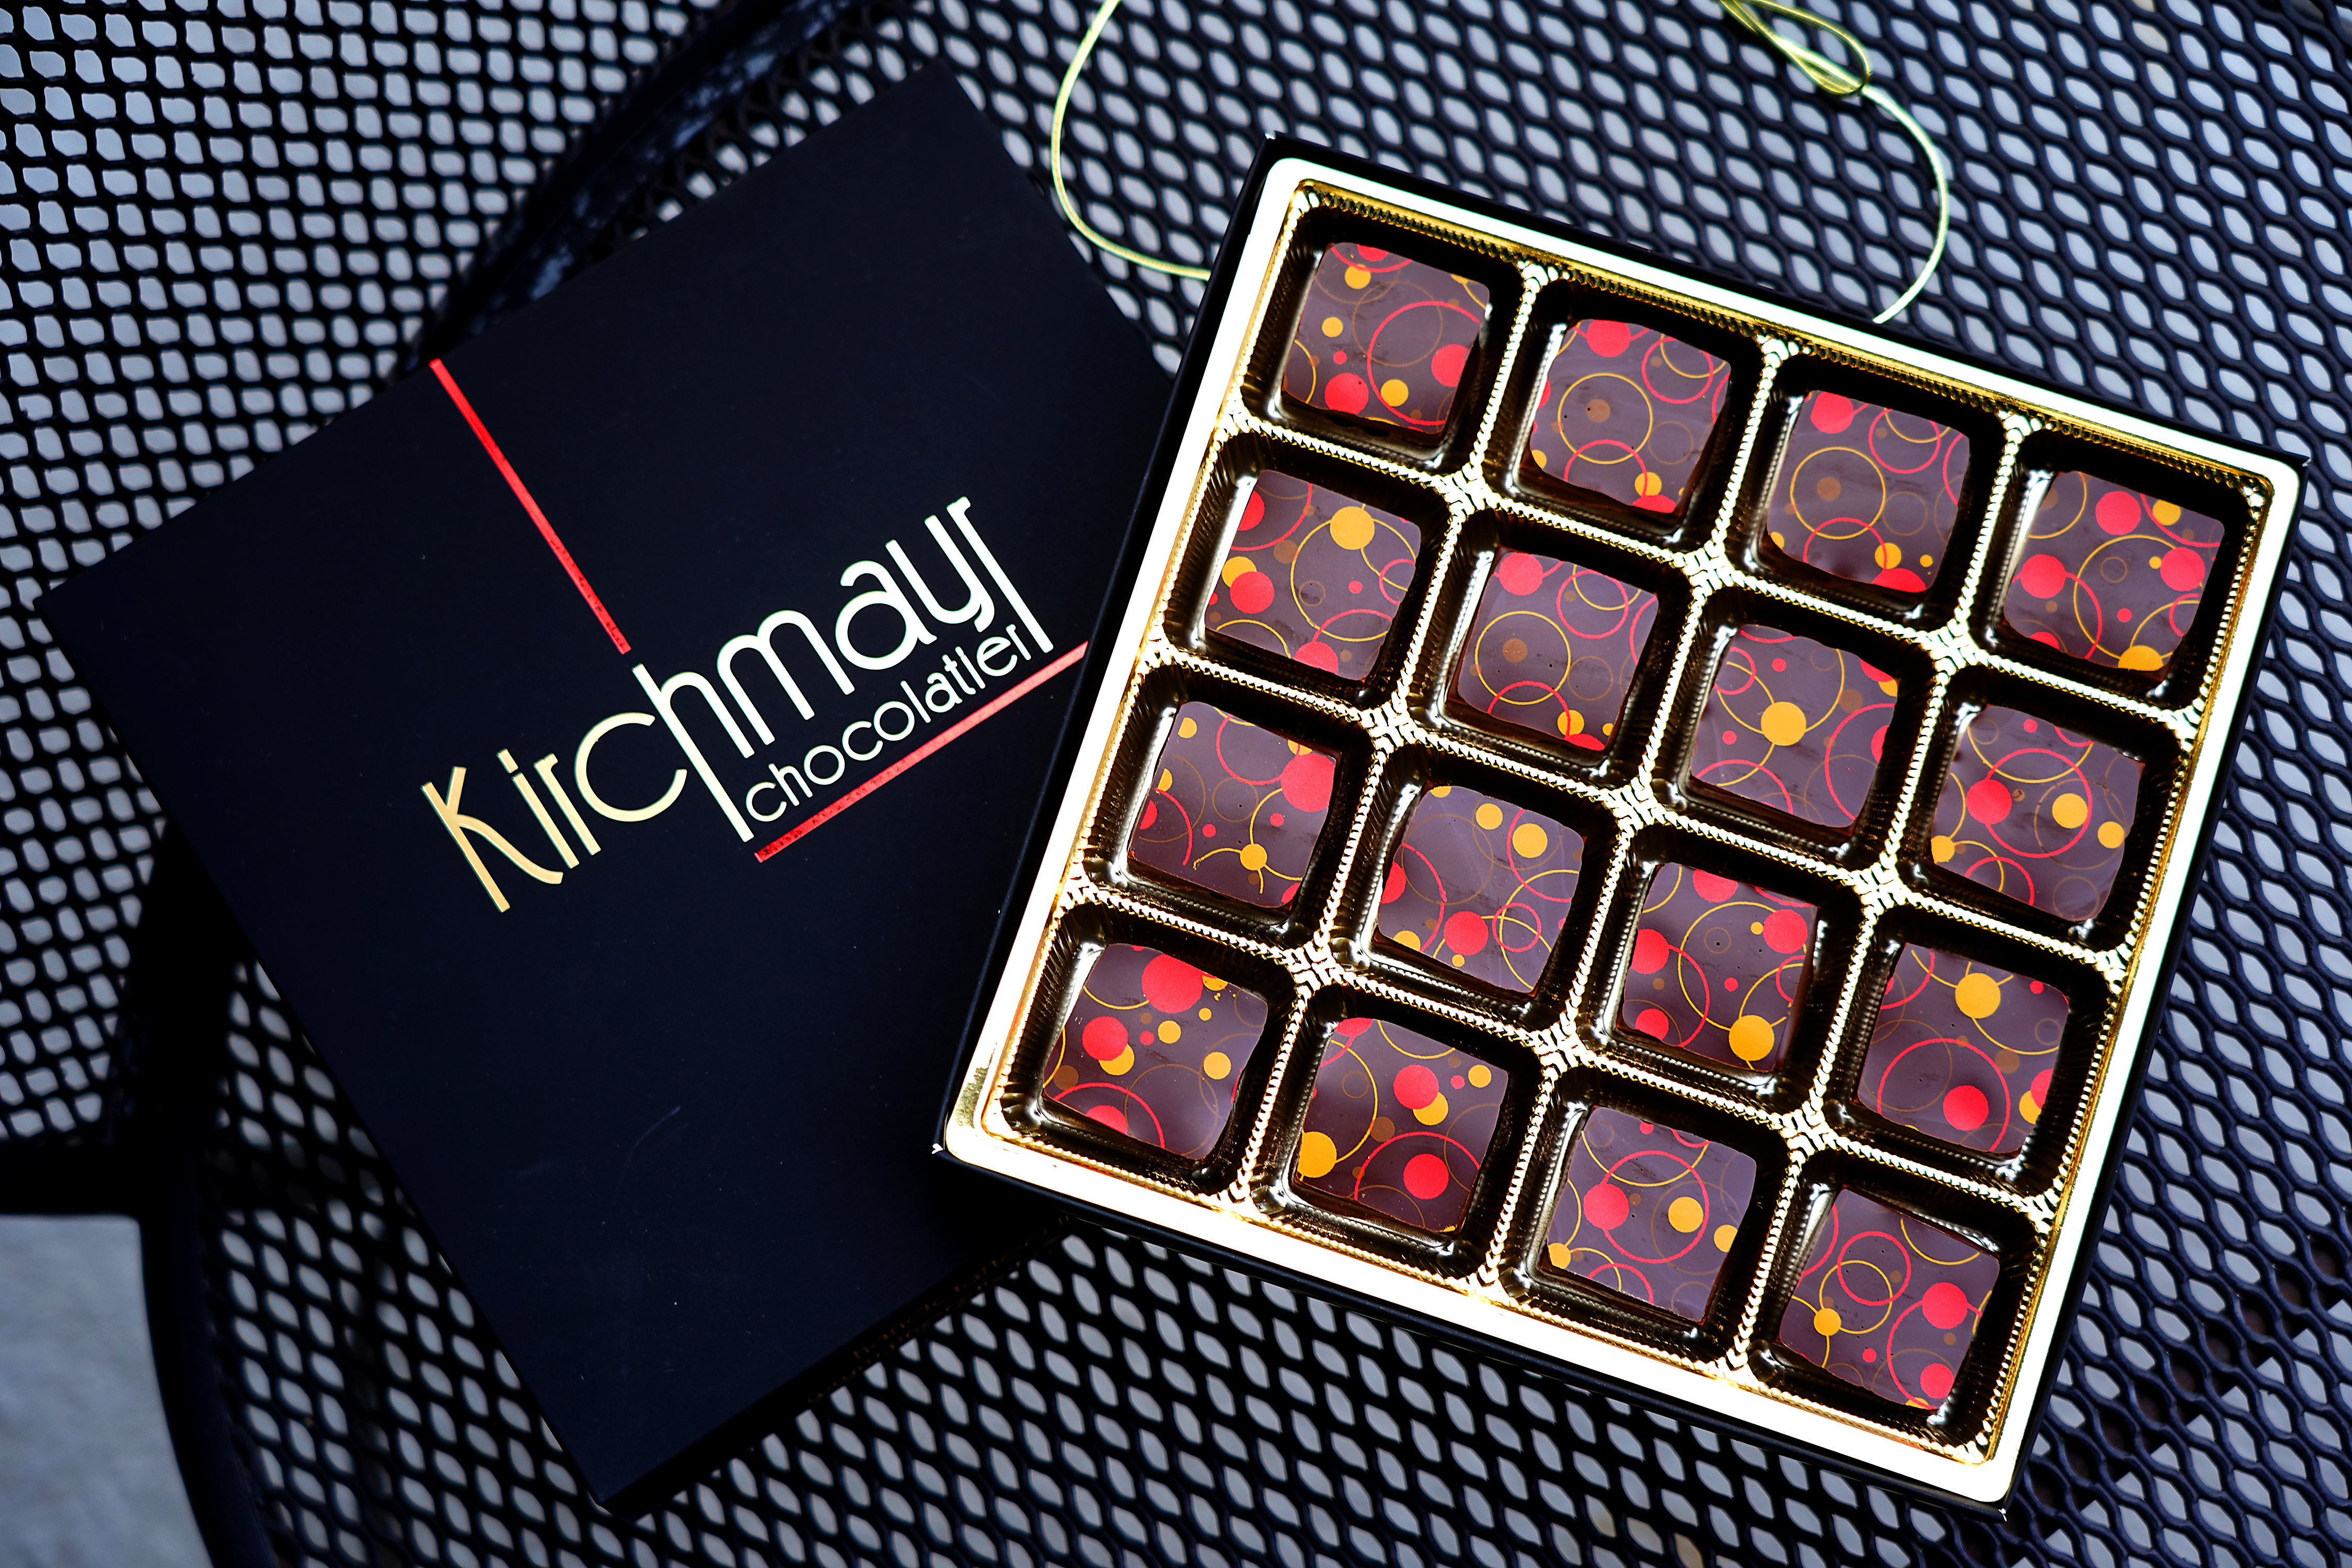 Kirchmayr chocolatier for the gift guide.